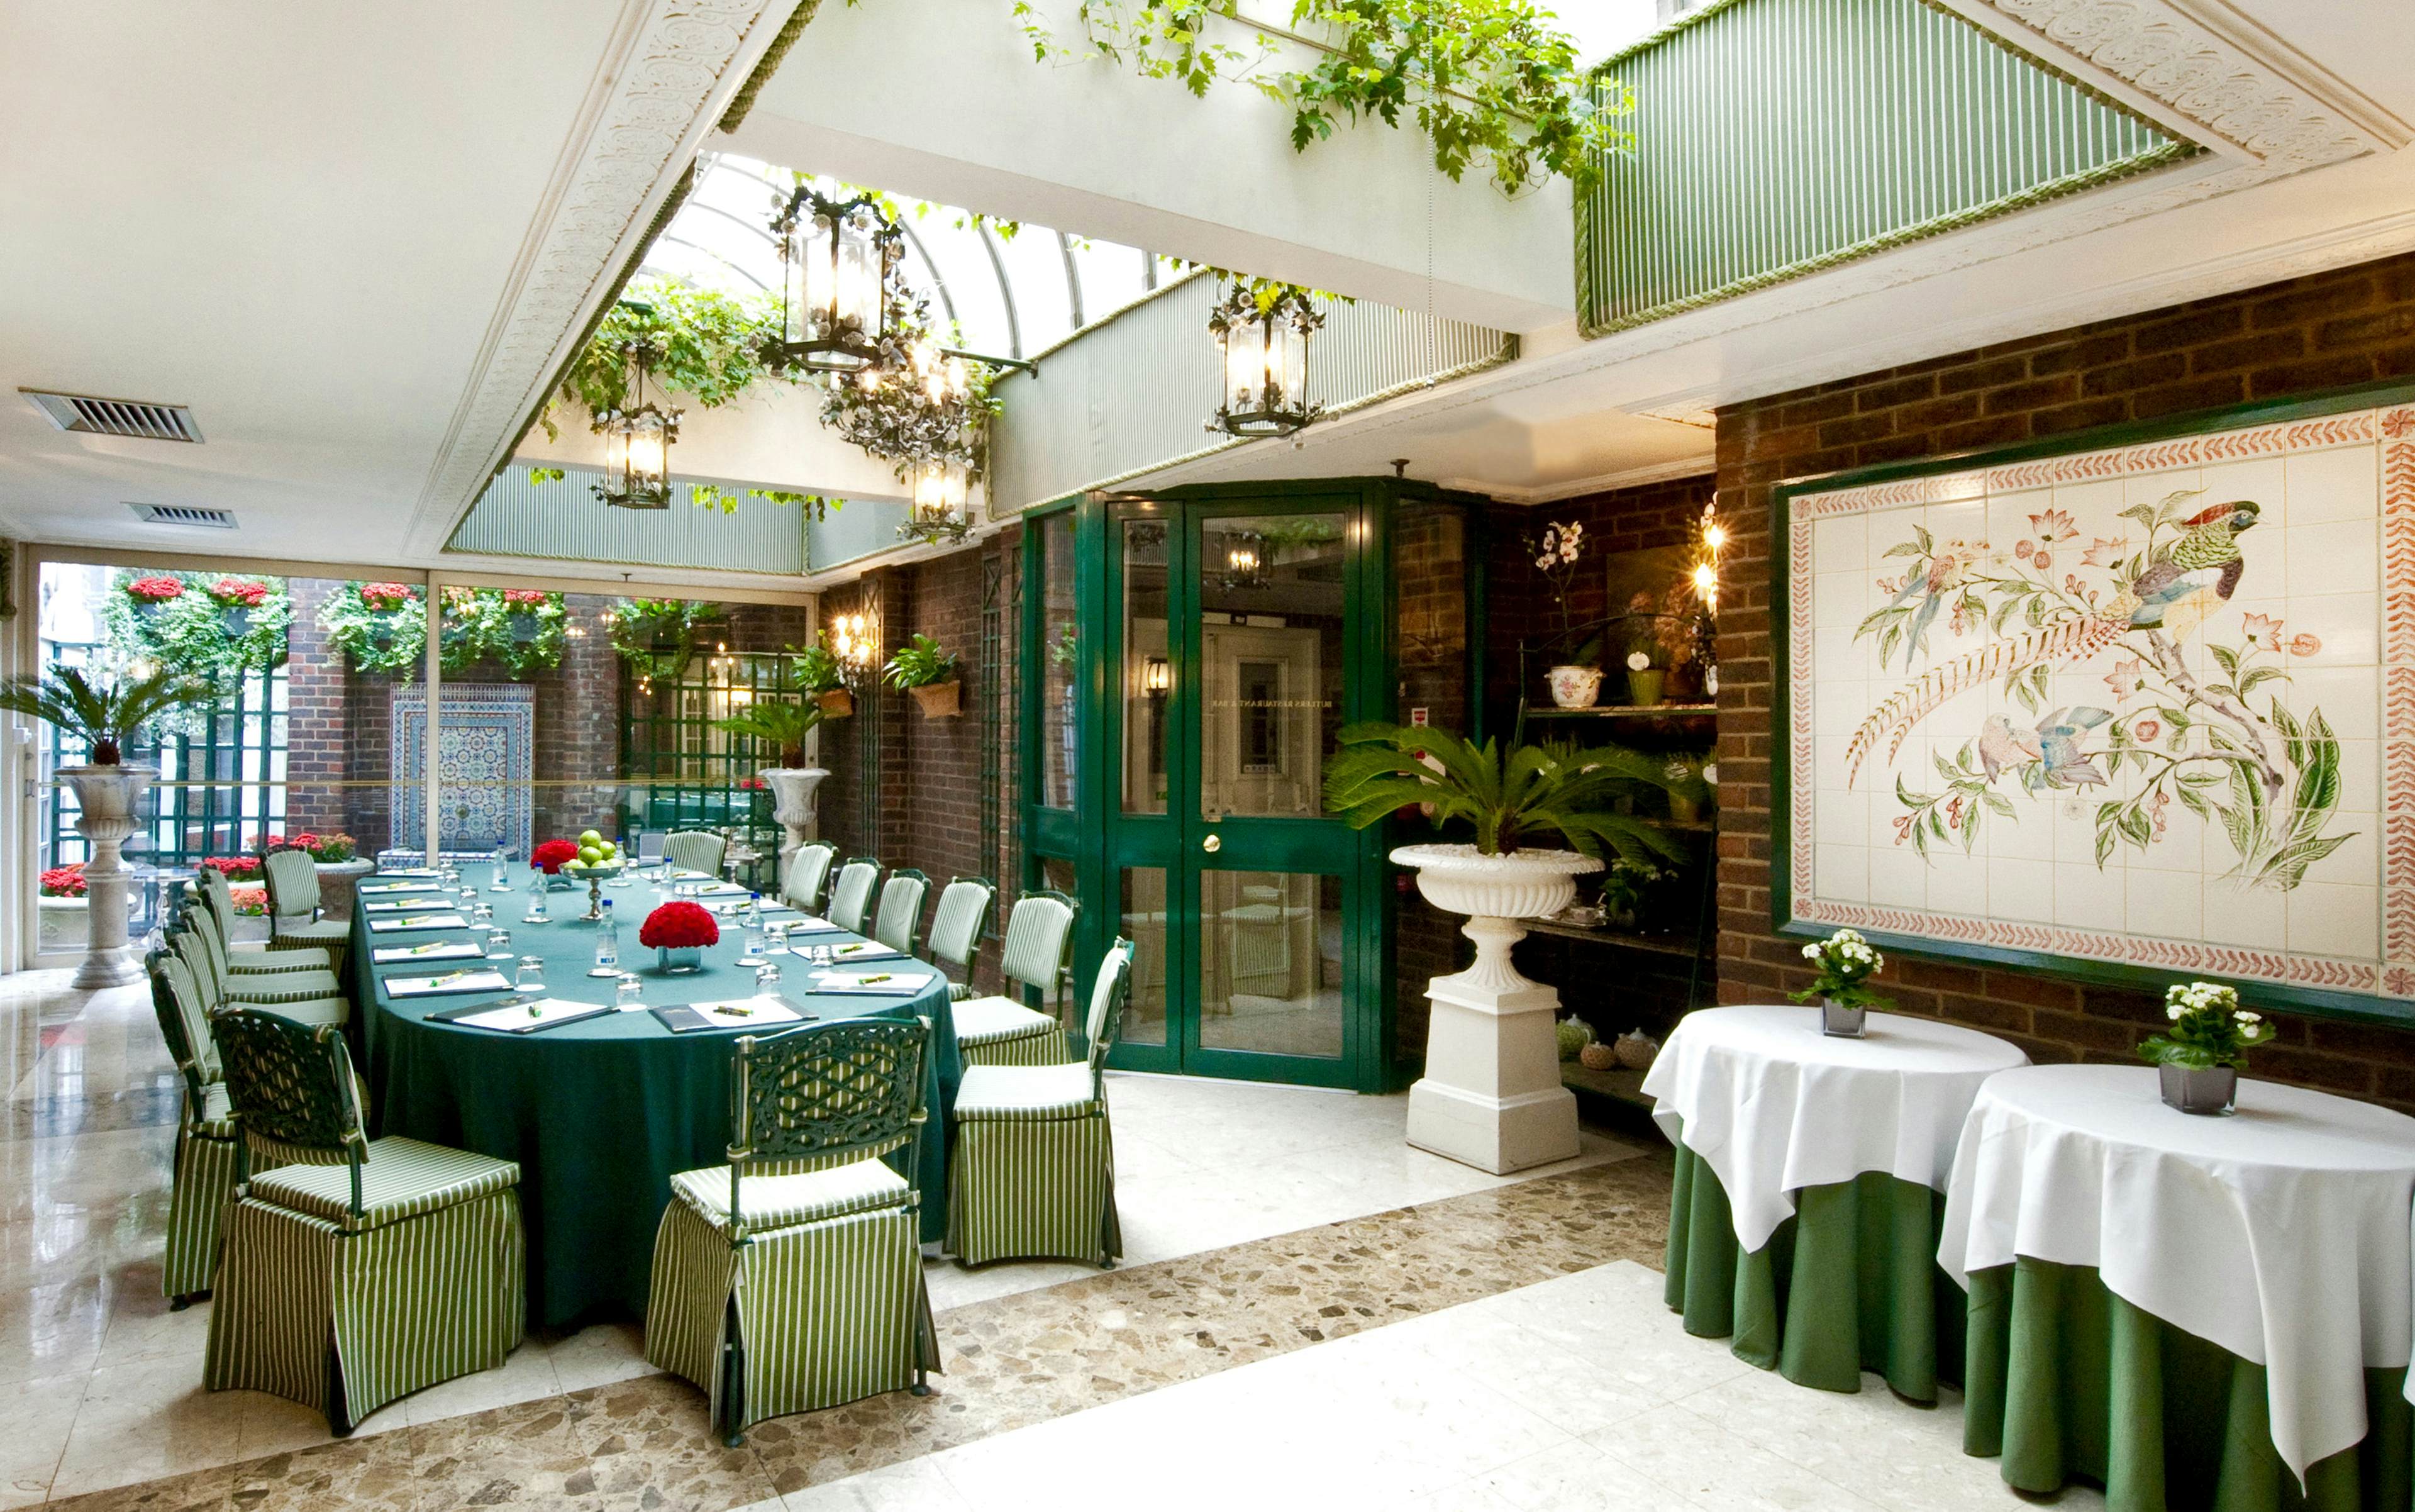 The Chesterfield Mayfair Hotel - The Conservatory image 1